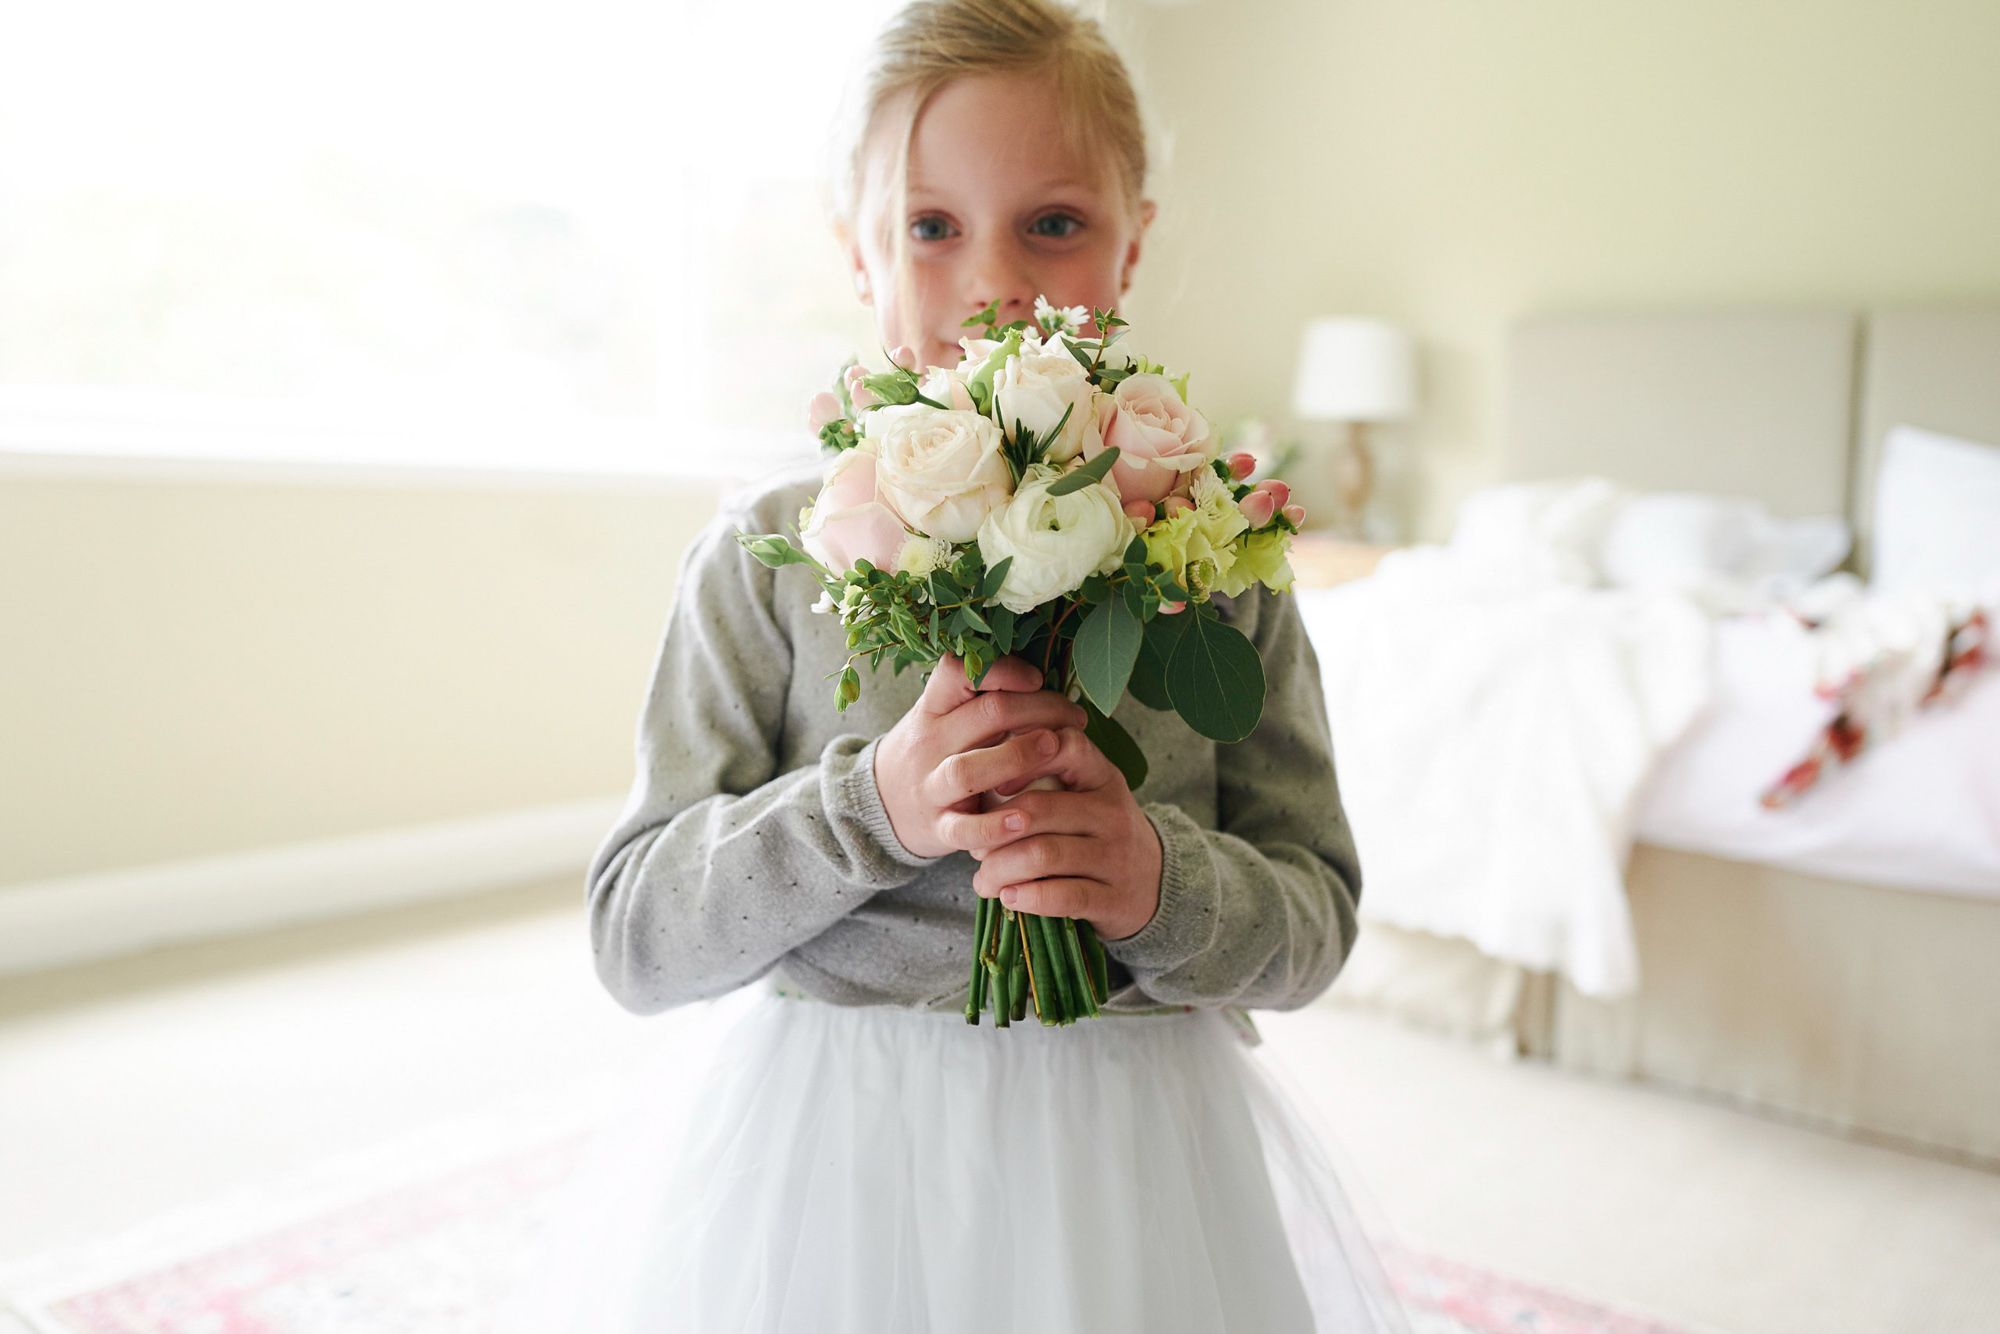 Little girl with wedding bouquet